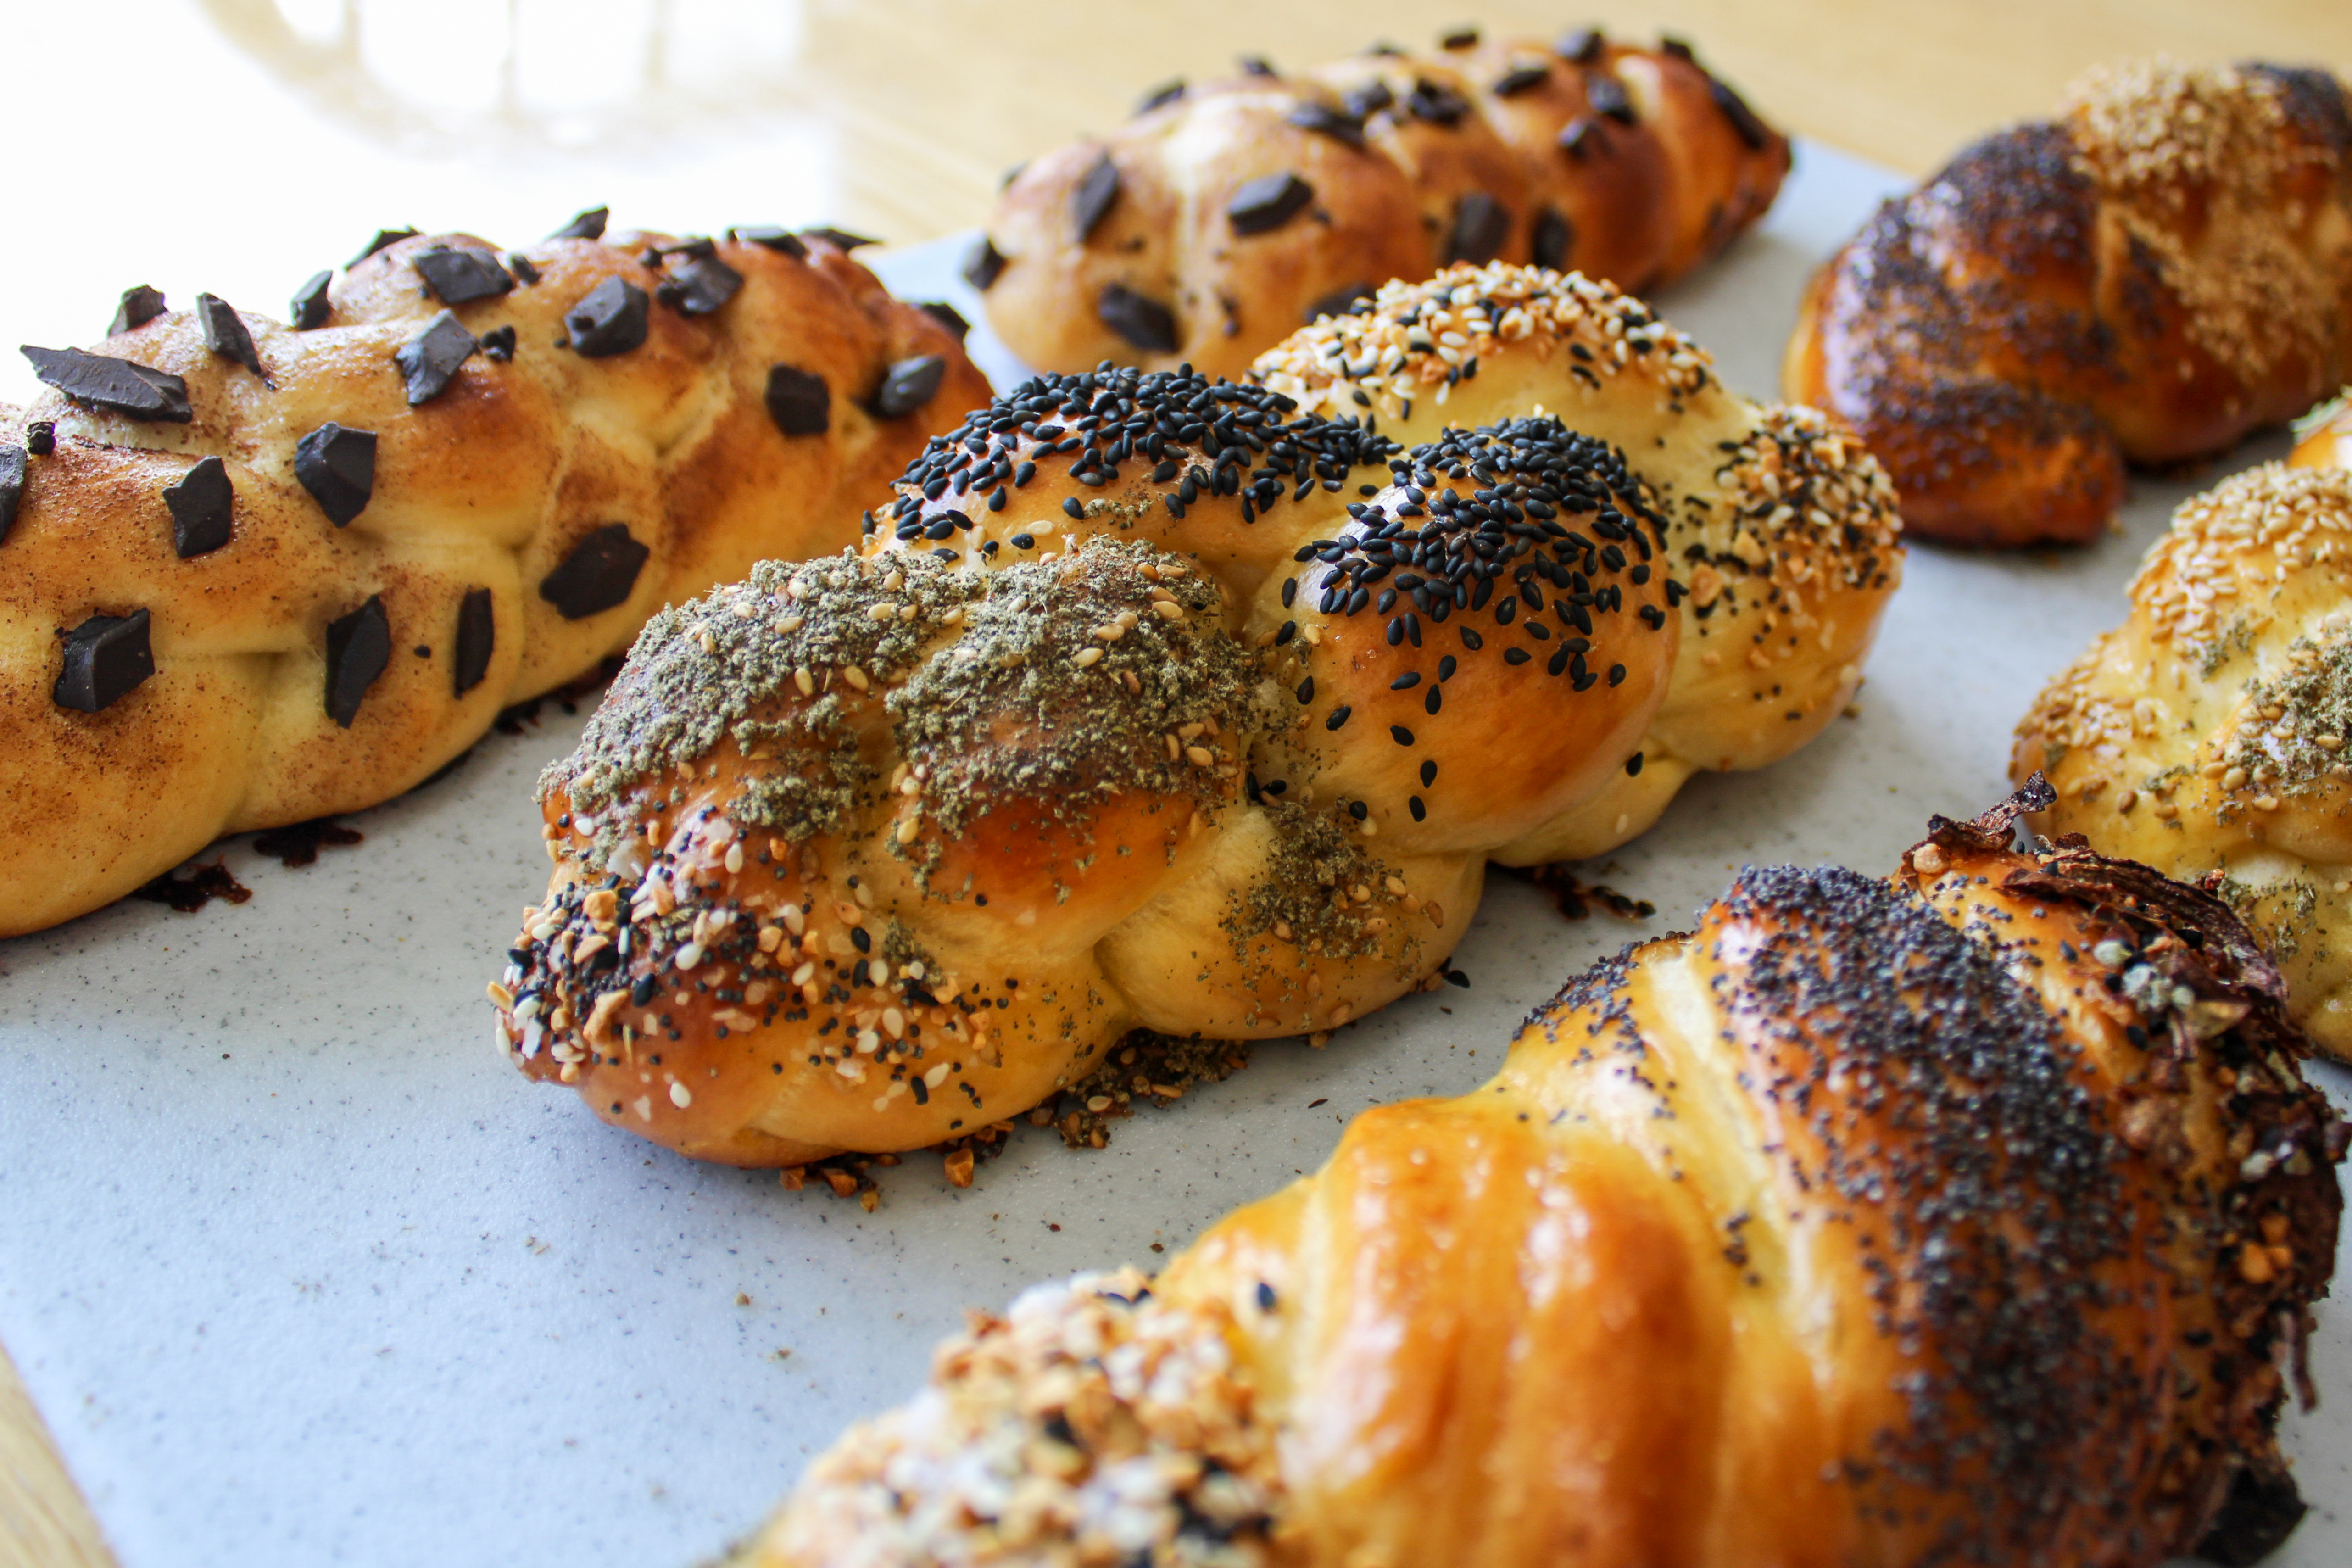 Loaves of challah, a braided bread, lay next to each other. Each loaf has different toppings.